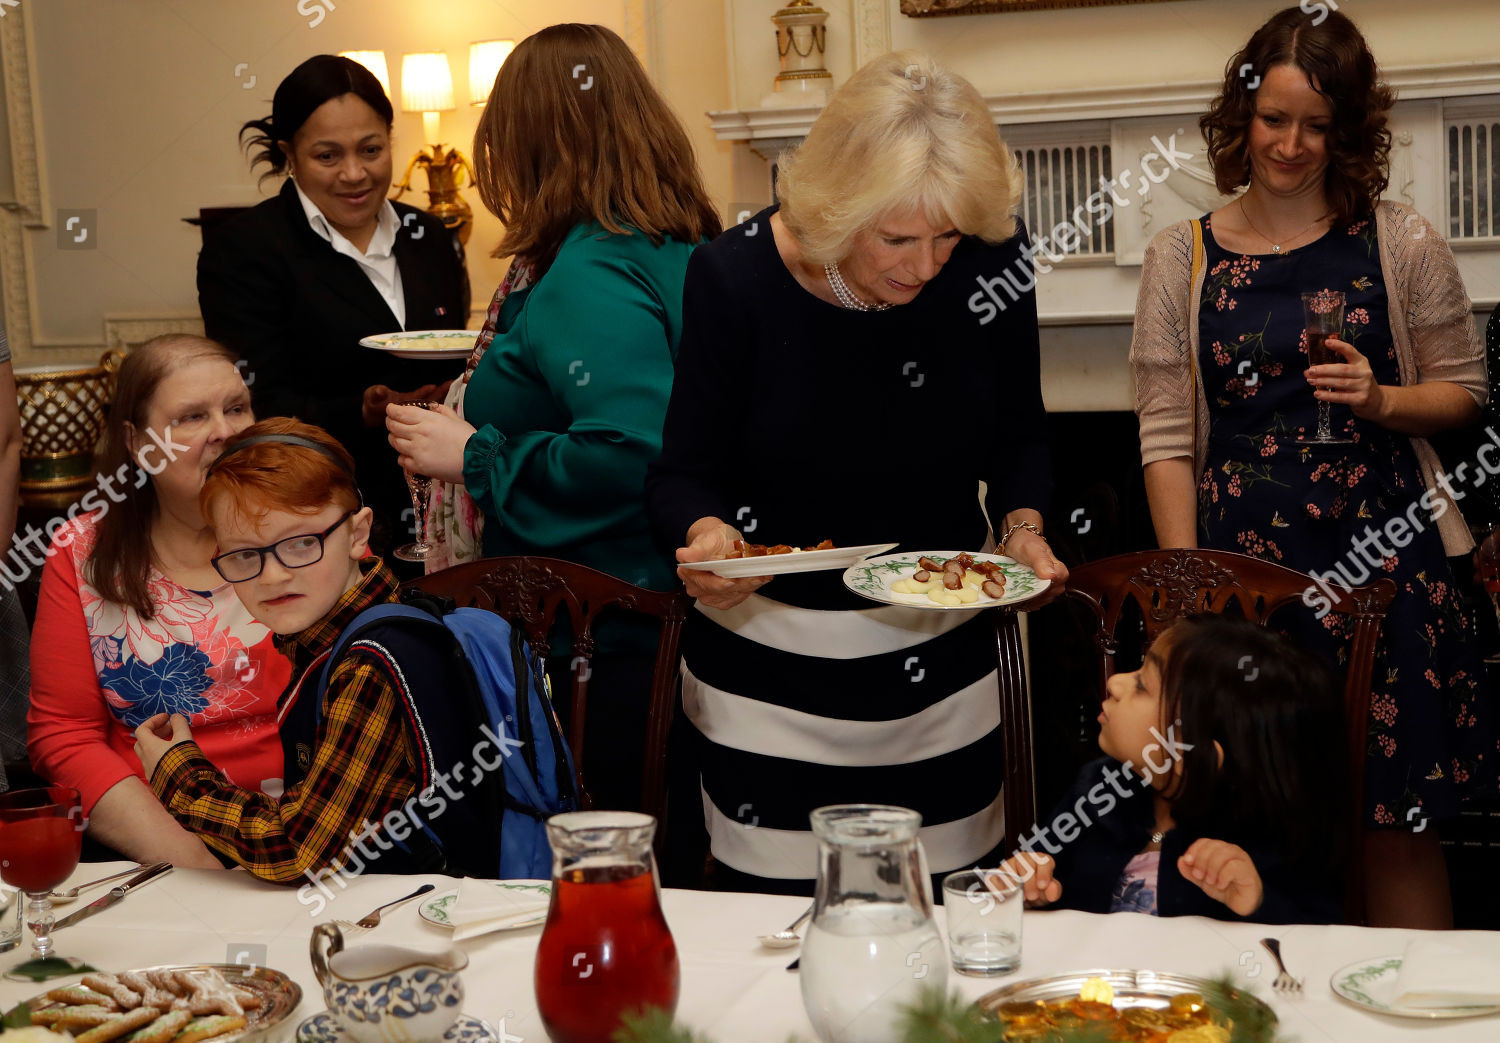 children-attend-a-christmas-event-at-clarence-house-london-uk-shutterstock-editorial-10015343g.jpg